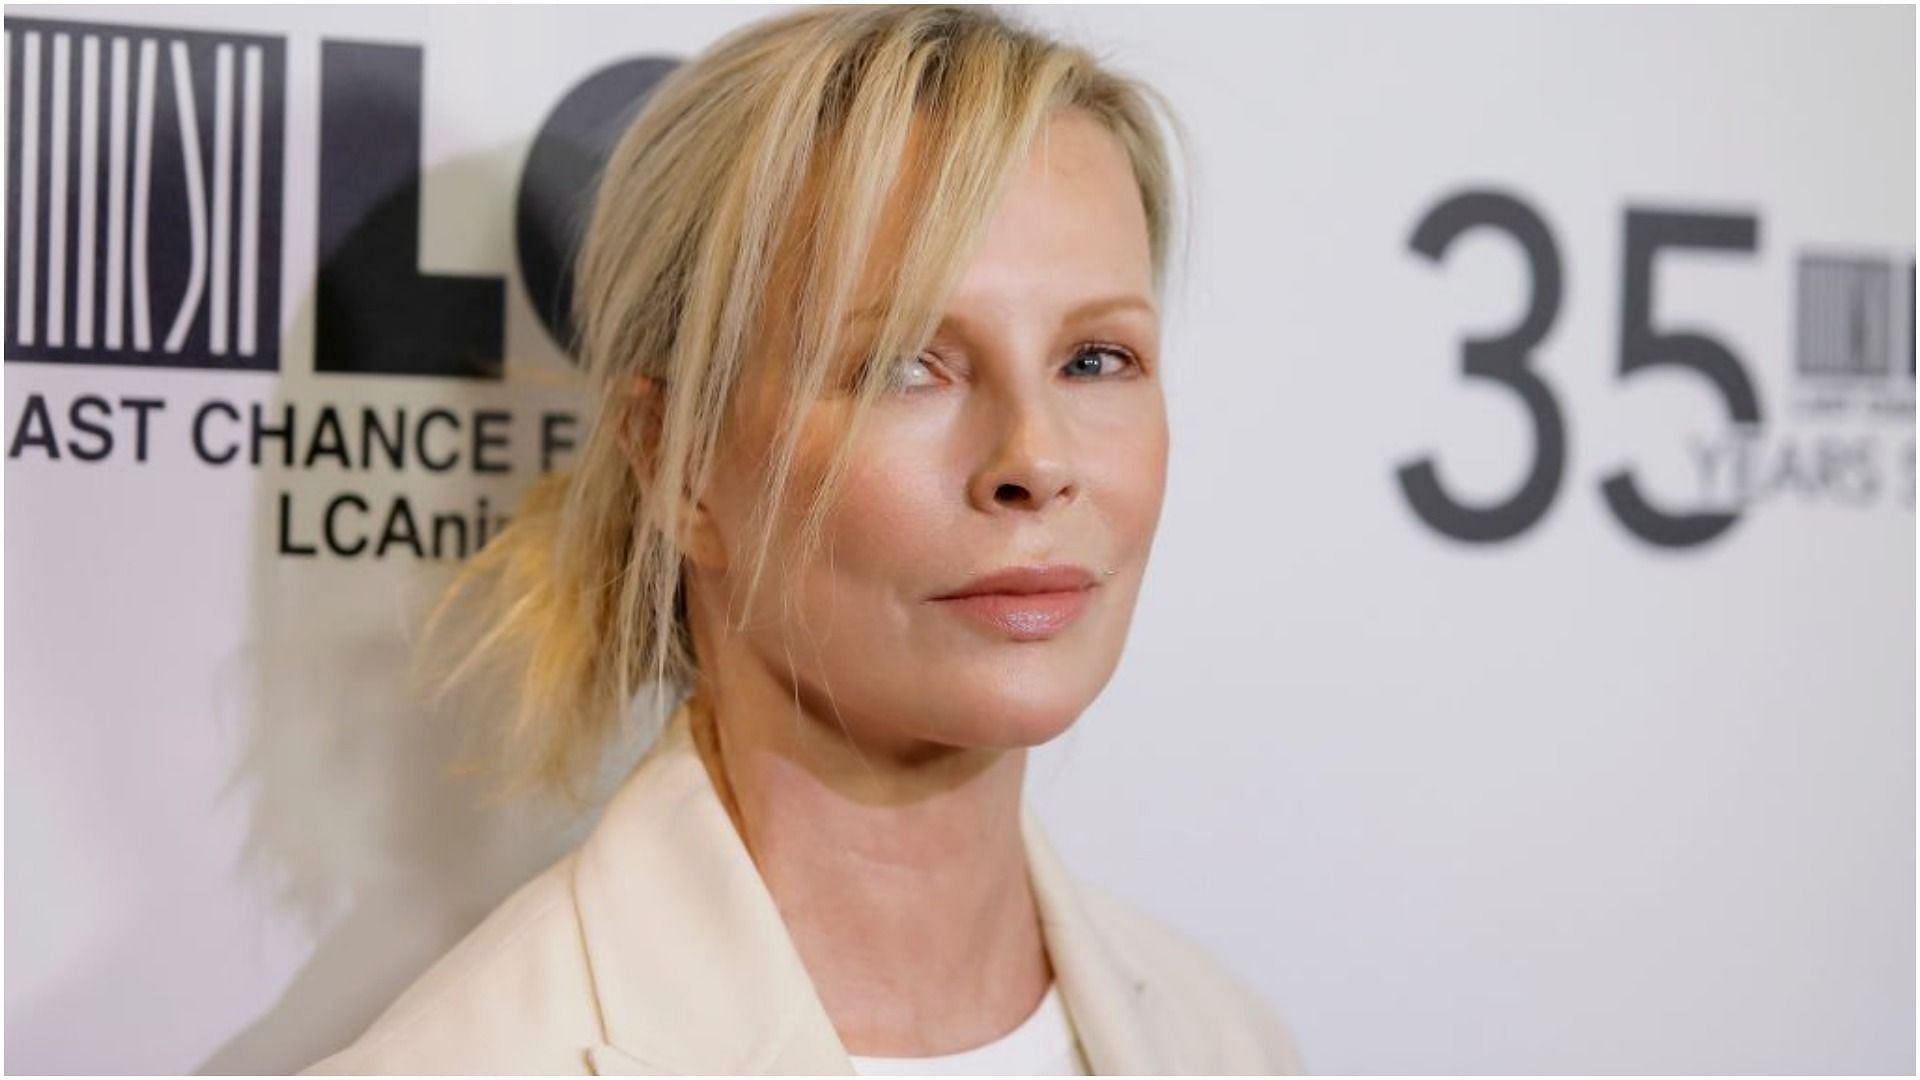 Kim Basinger has recently spoke up about her split from Alec Baldwin (Image via Tibrina Hobson/Getty Images)